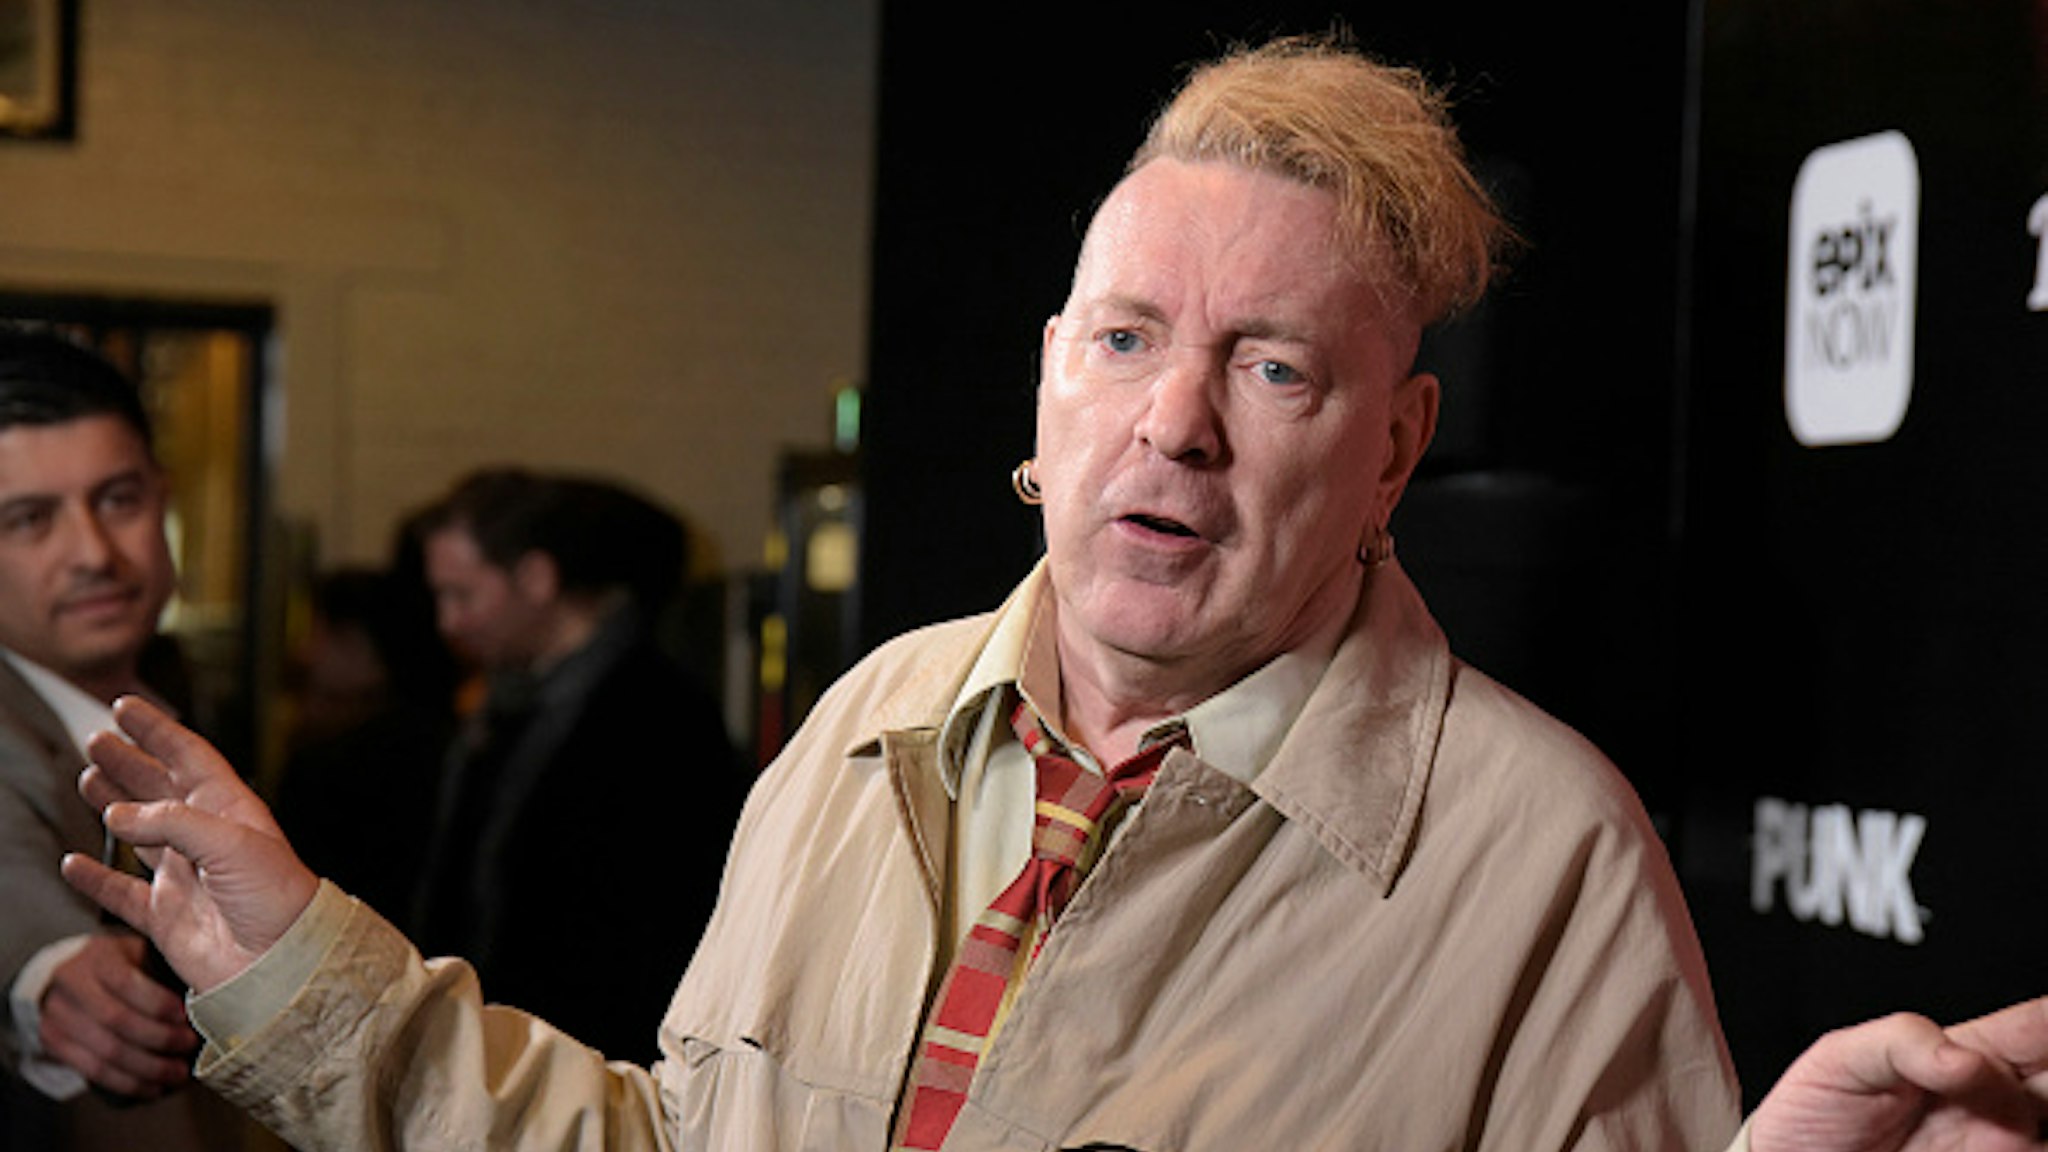 LOS ANGELES, CALIFORNIA - MARCH 04: Singer John Lydon of the Sex Pistols attends the Los Angeles premiere of the EPIX Original Docu-Series "PUNK" at SIR on March 04, 2019 in Los Angeles, California.